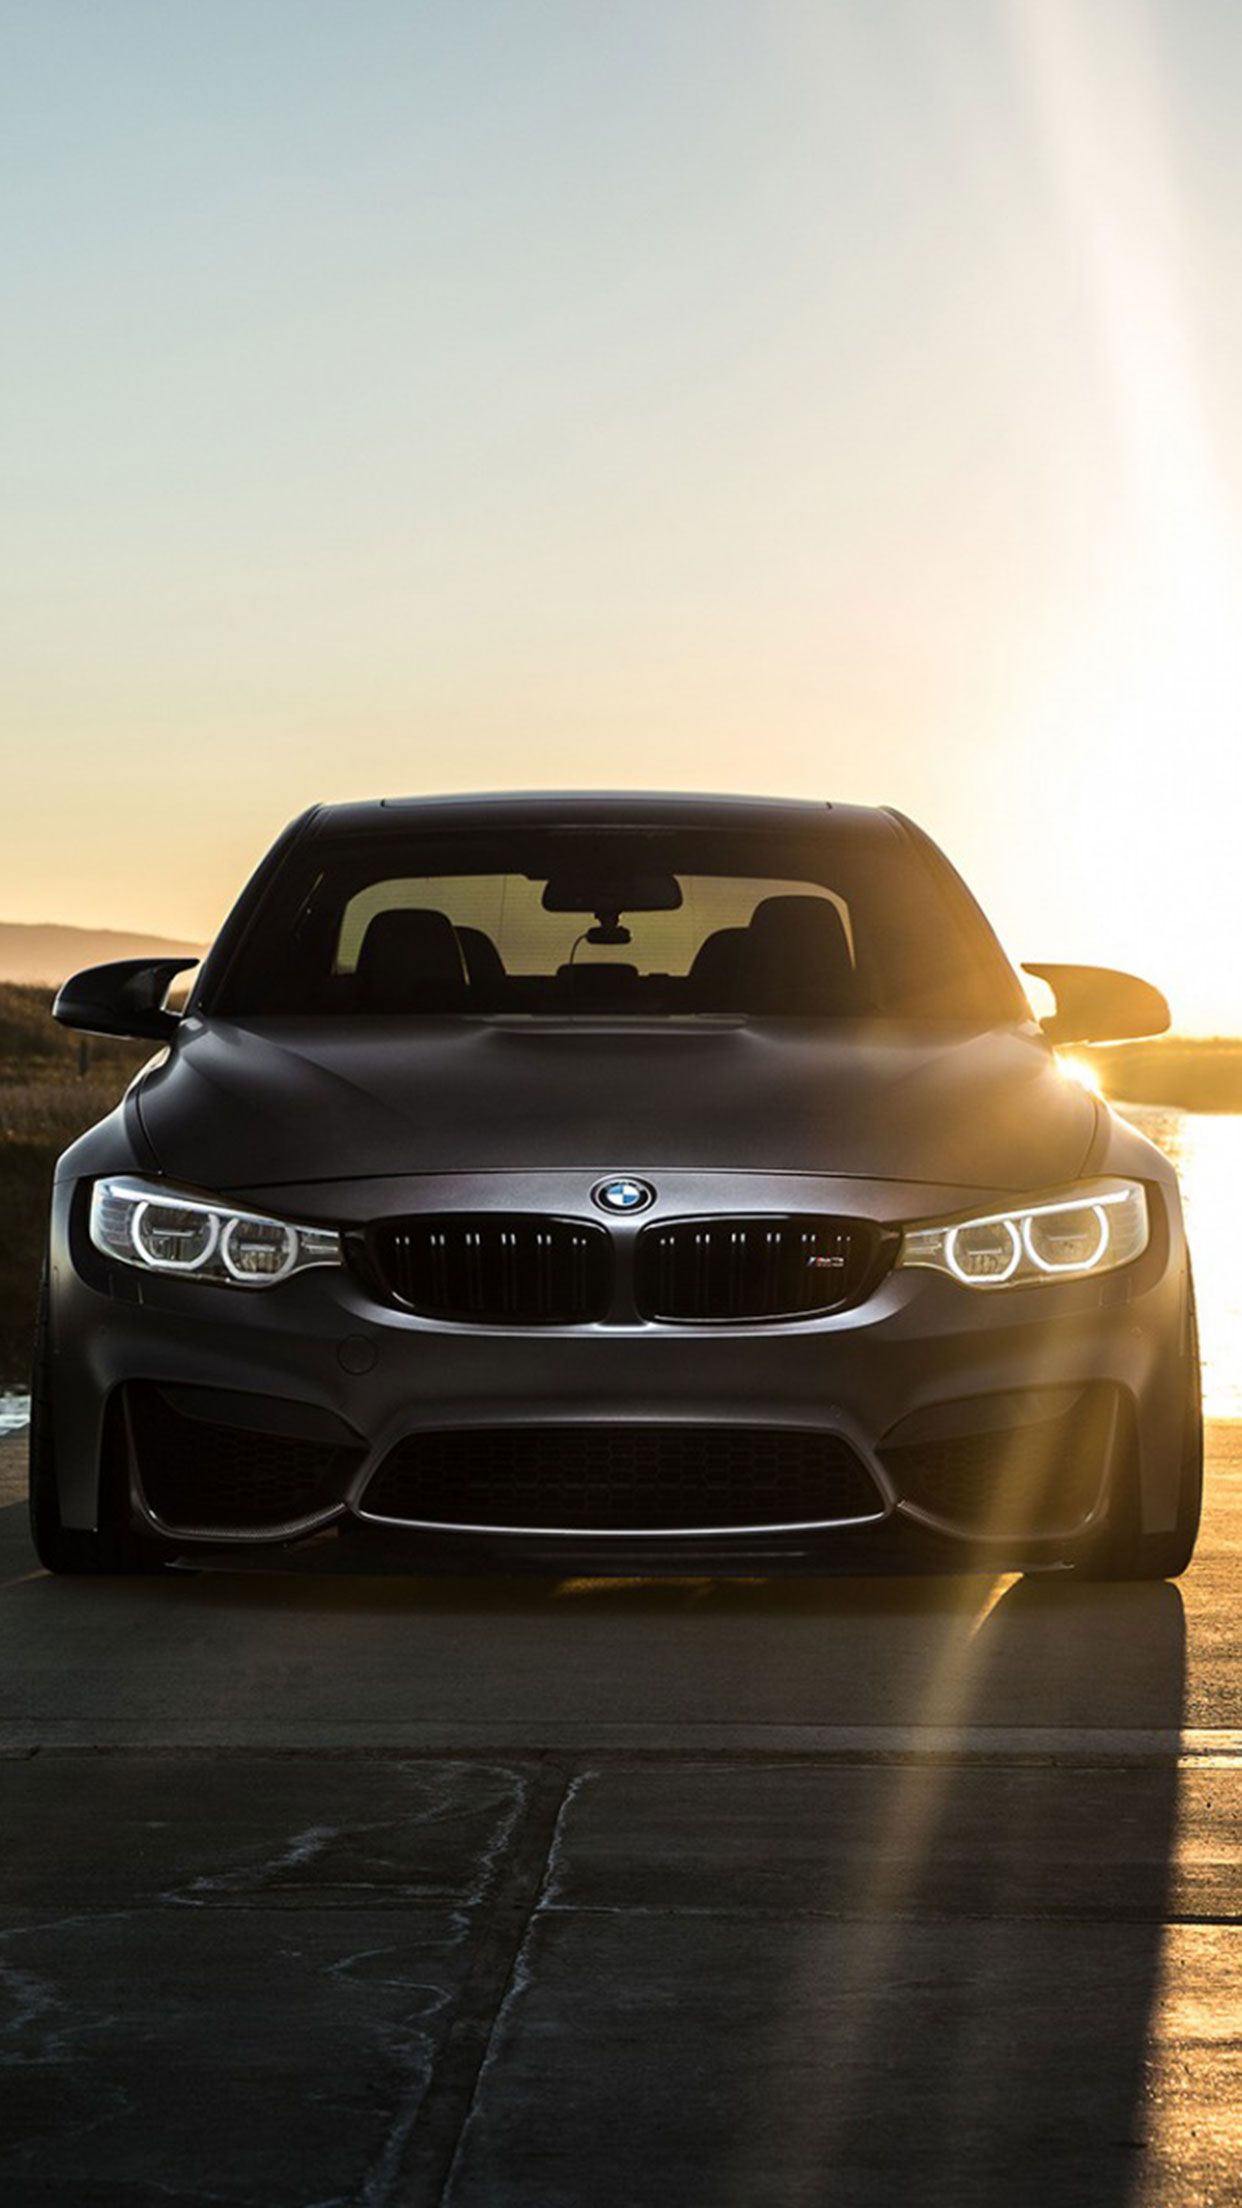 Grey Bmw Car Wallpaper For iPhone And Android At